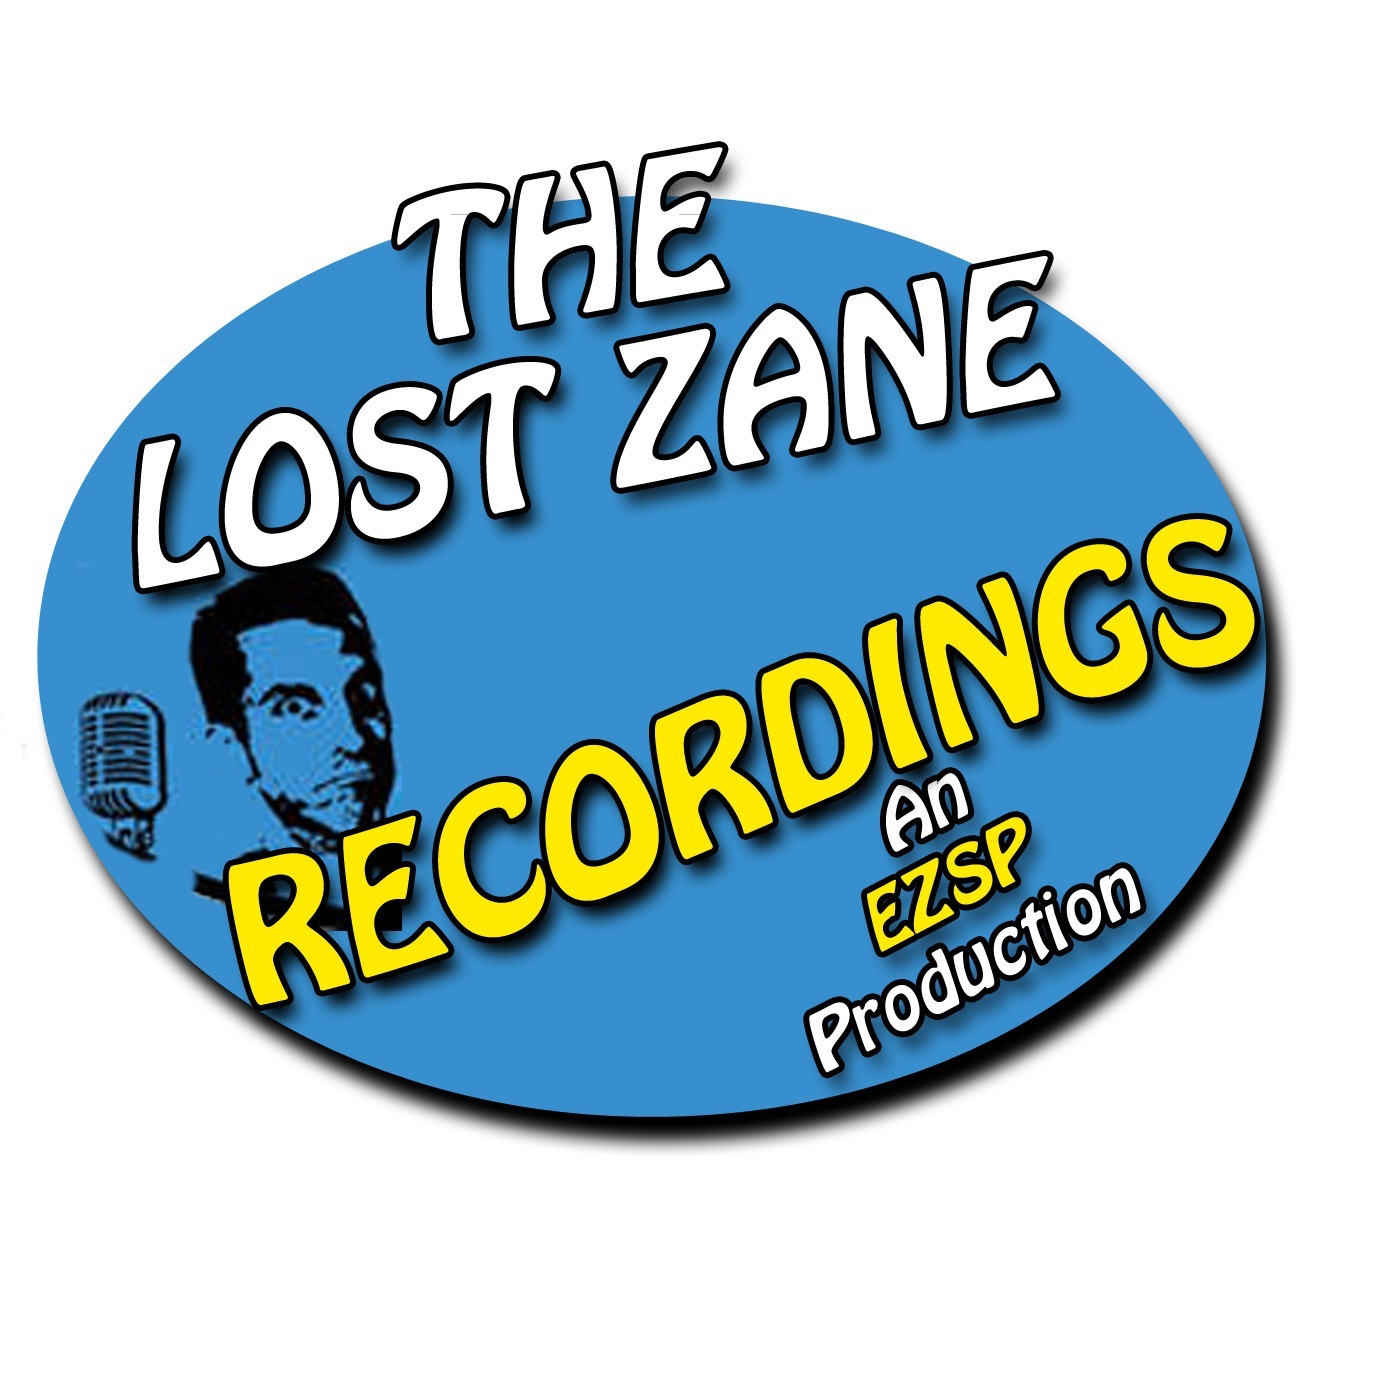 Stupid Cupid Ben Glaze! Lost Zane Recordings FREEview 211 Airdate: 2/15/2017